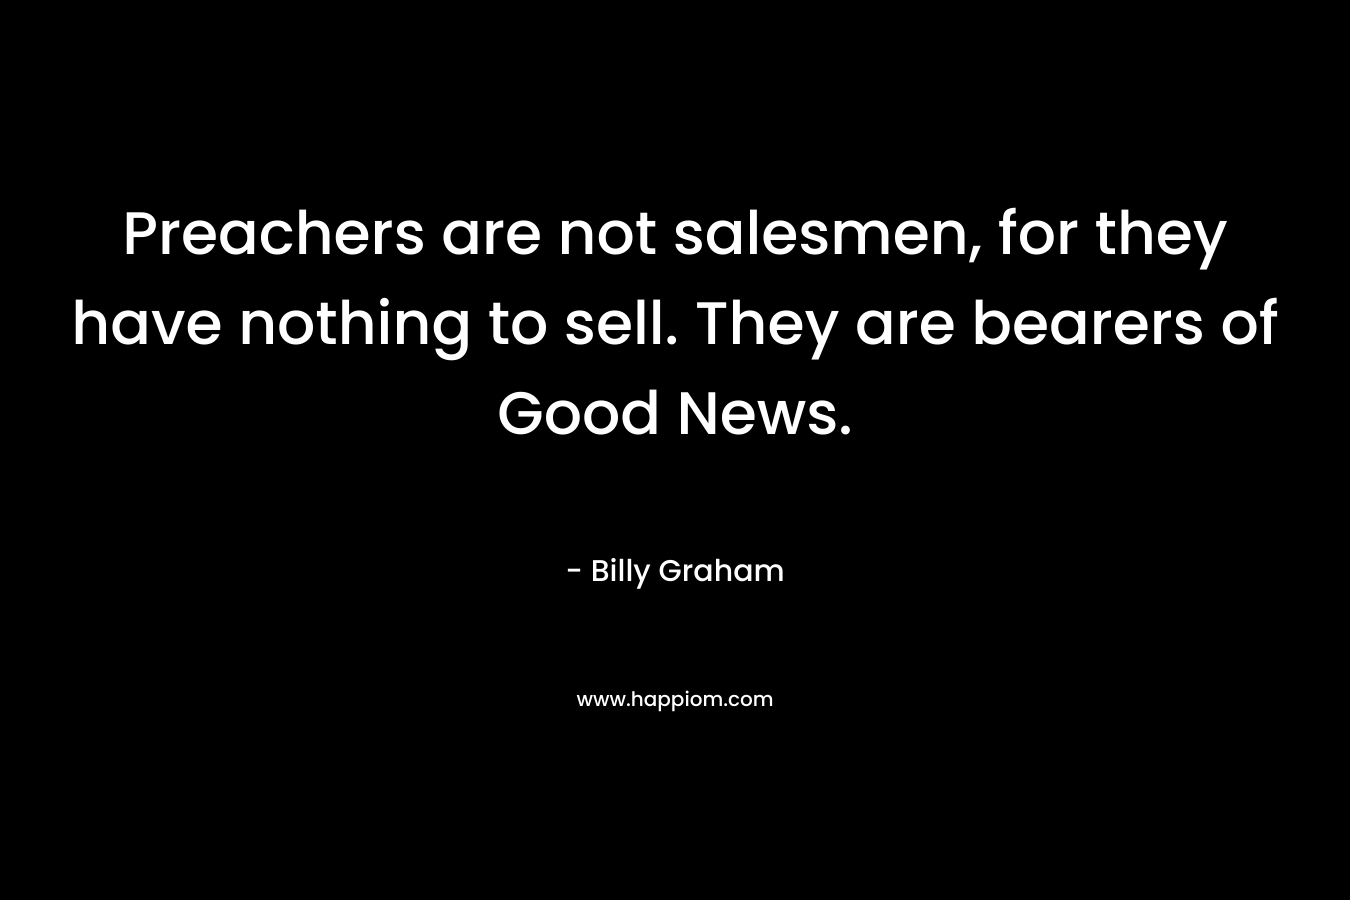 Preachers are not salesmen, for they have nothing to sell. They are bearers of Good News. – Billy Graham